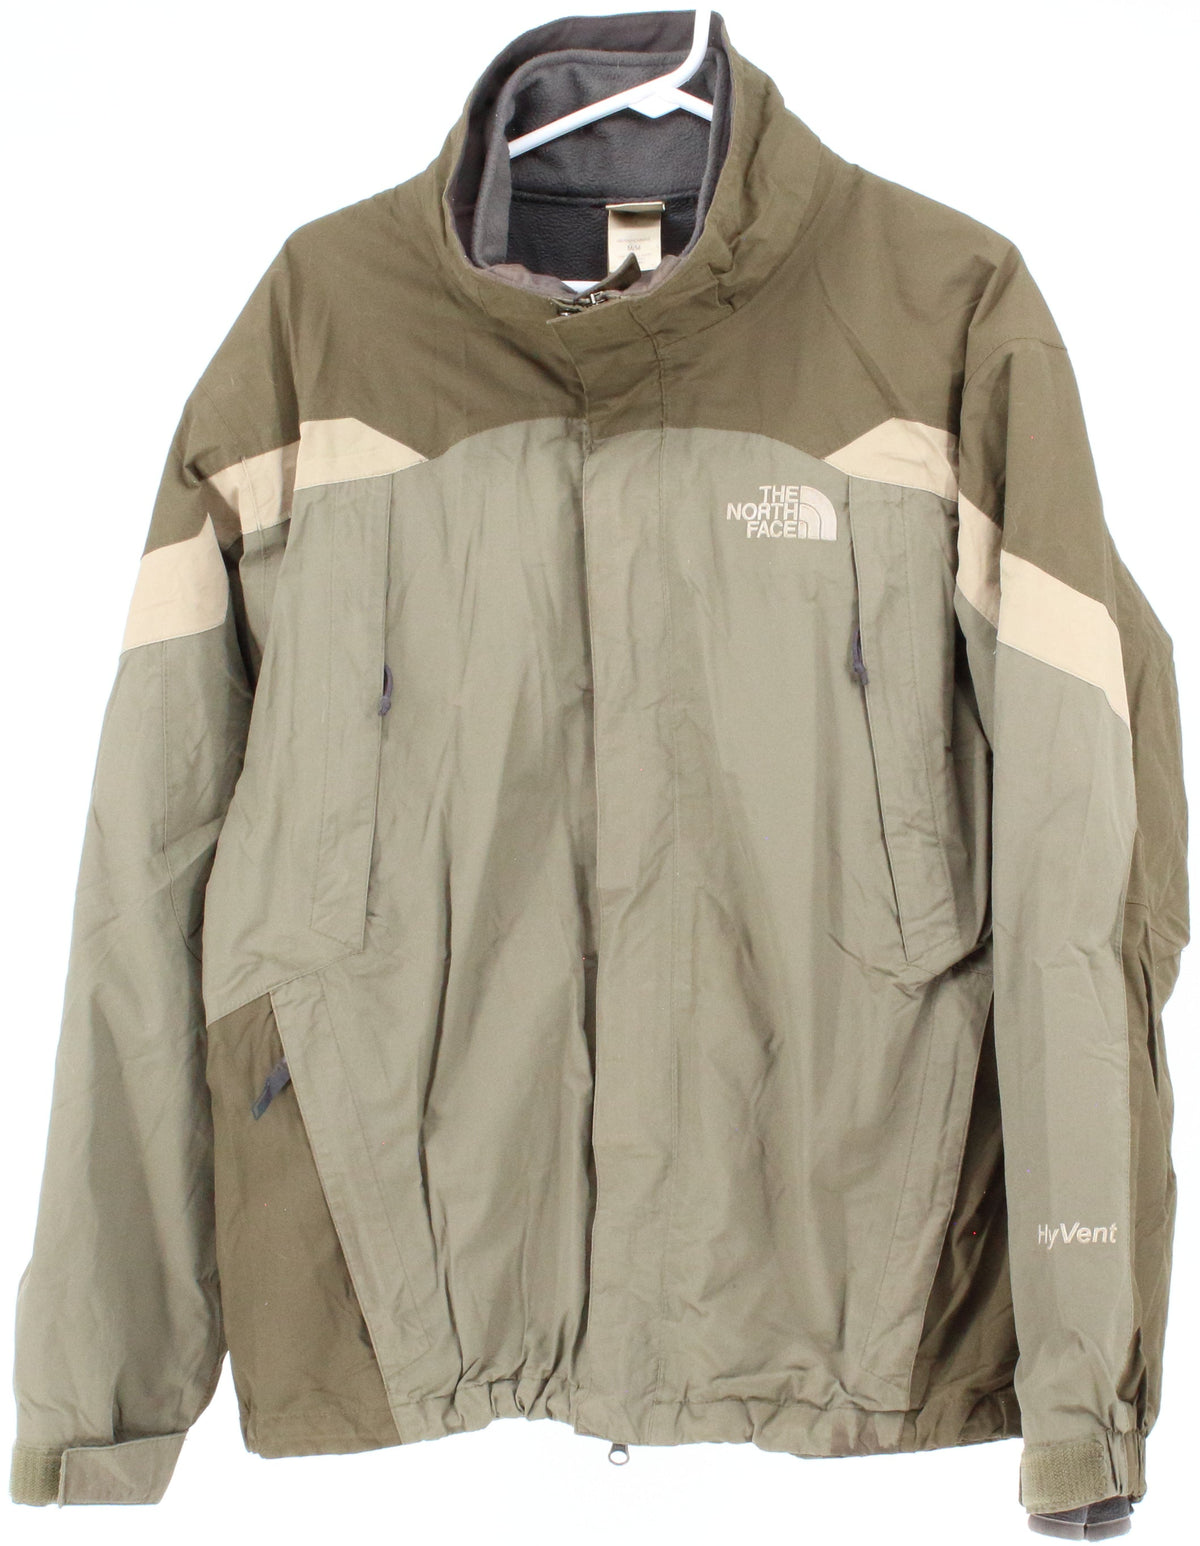 The North Face HyVent Military Green Fleece Lined Men's Jacket